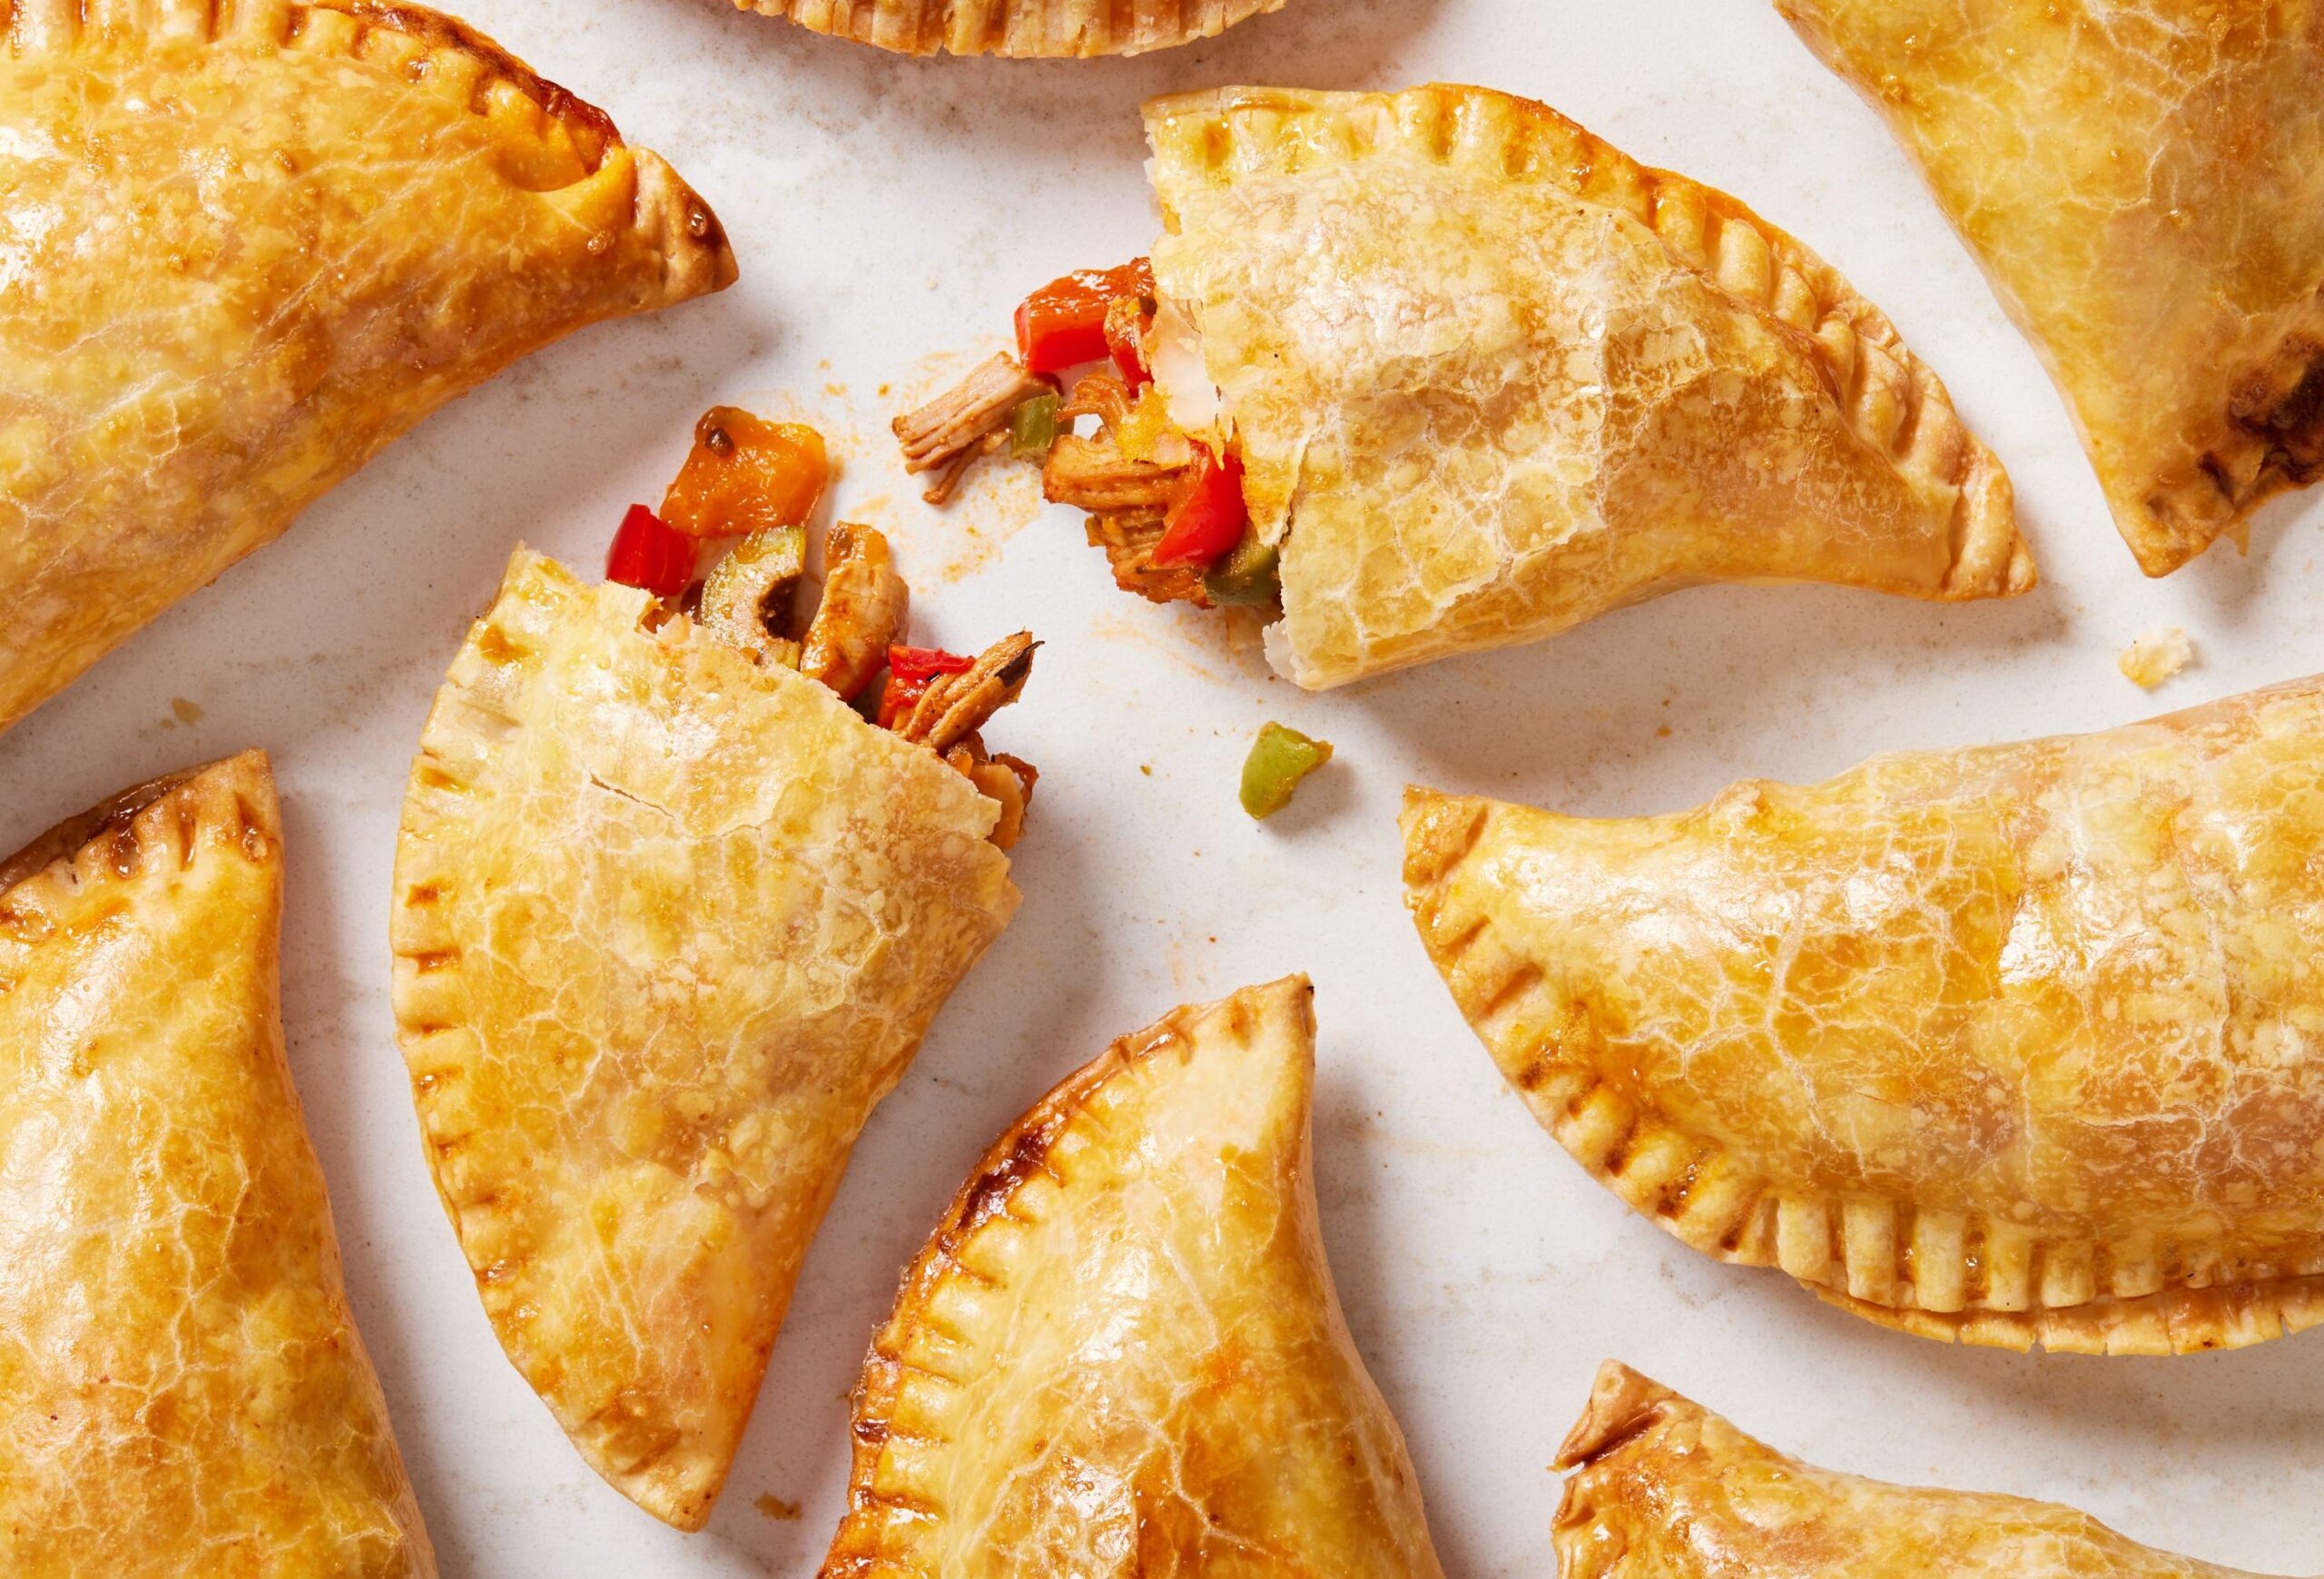  If you like savory snacks that are packed with flavor, these empanadas are exactly what you need.